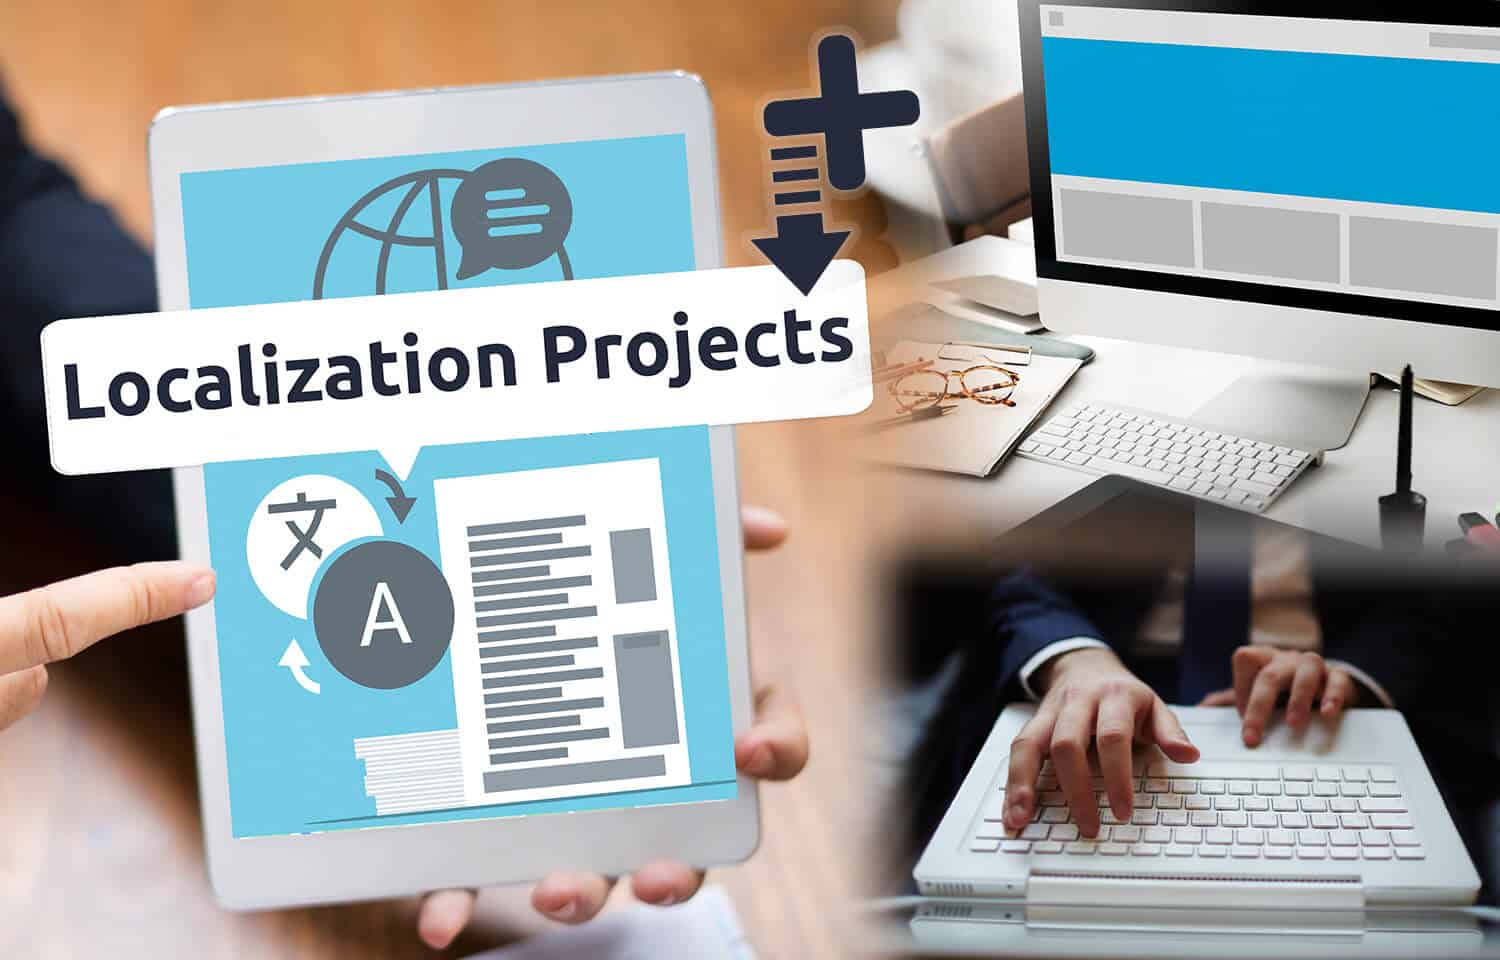 The 3 Benefits of Adding Desktop Publishing or Typesetting Services to Your Localization Projects